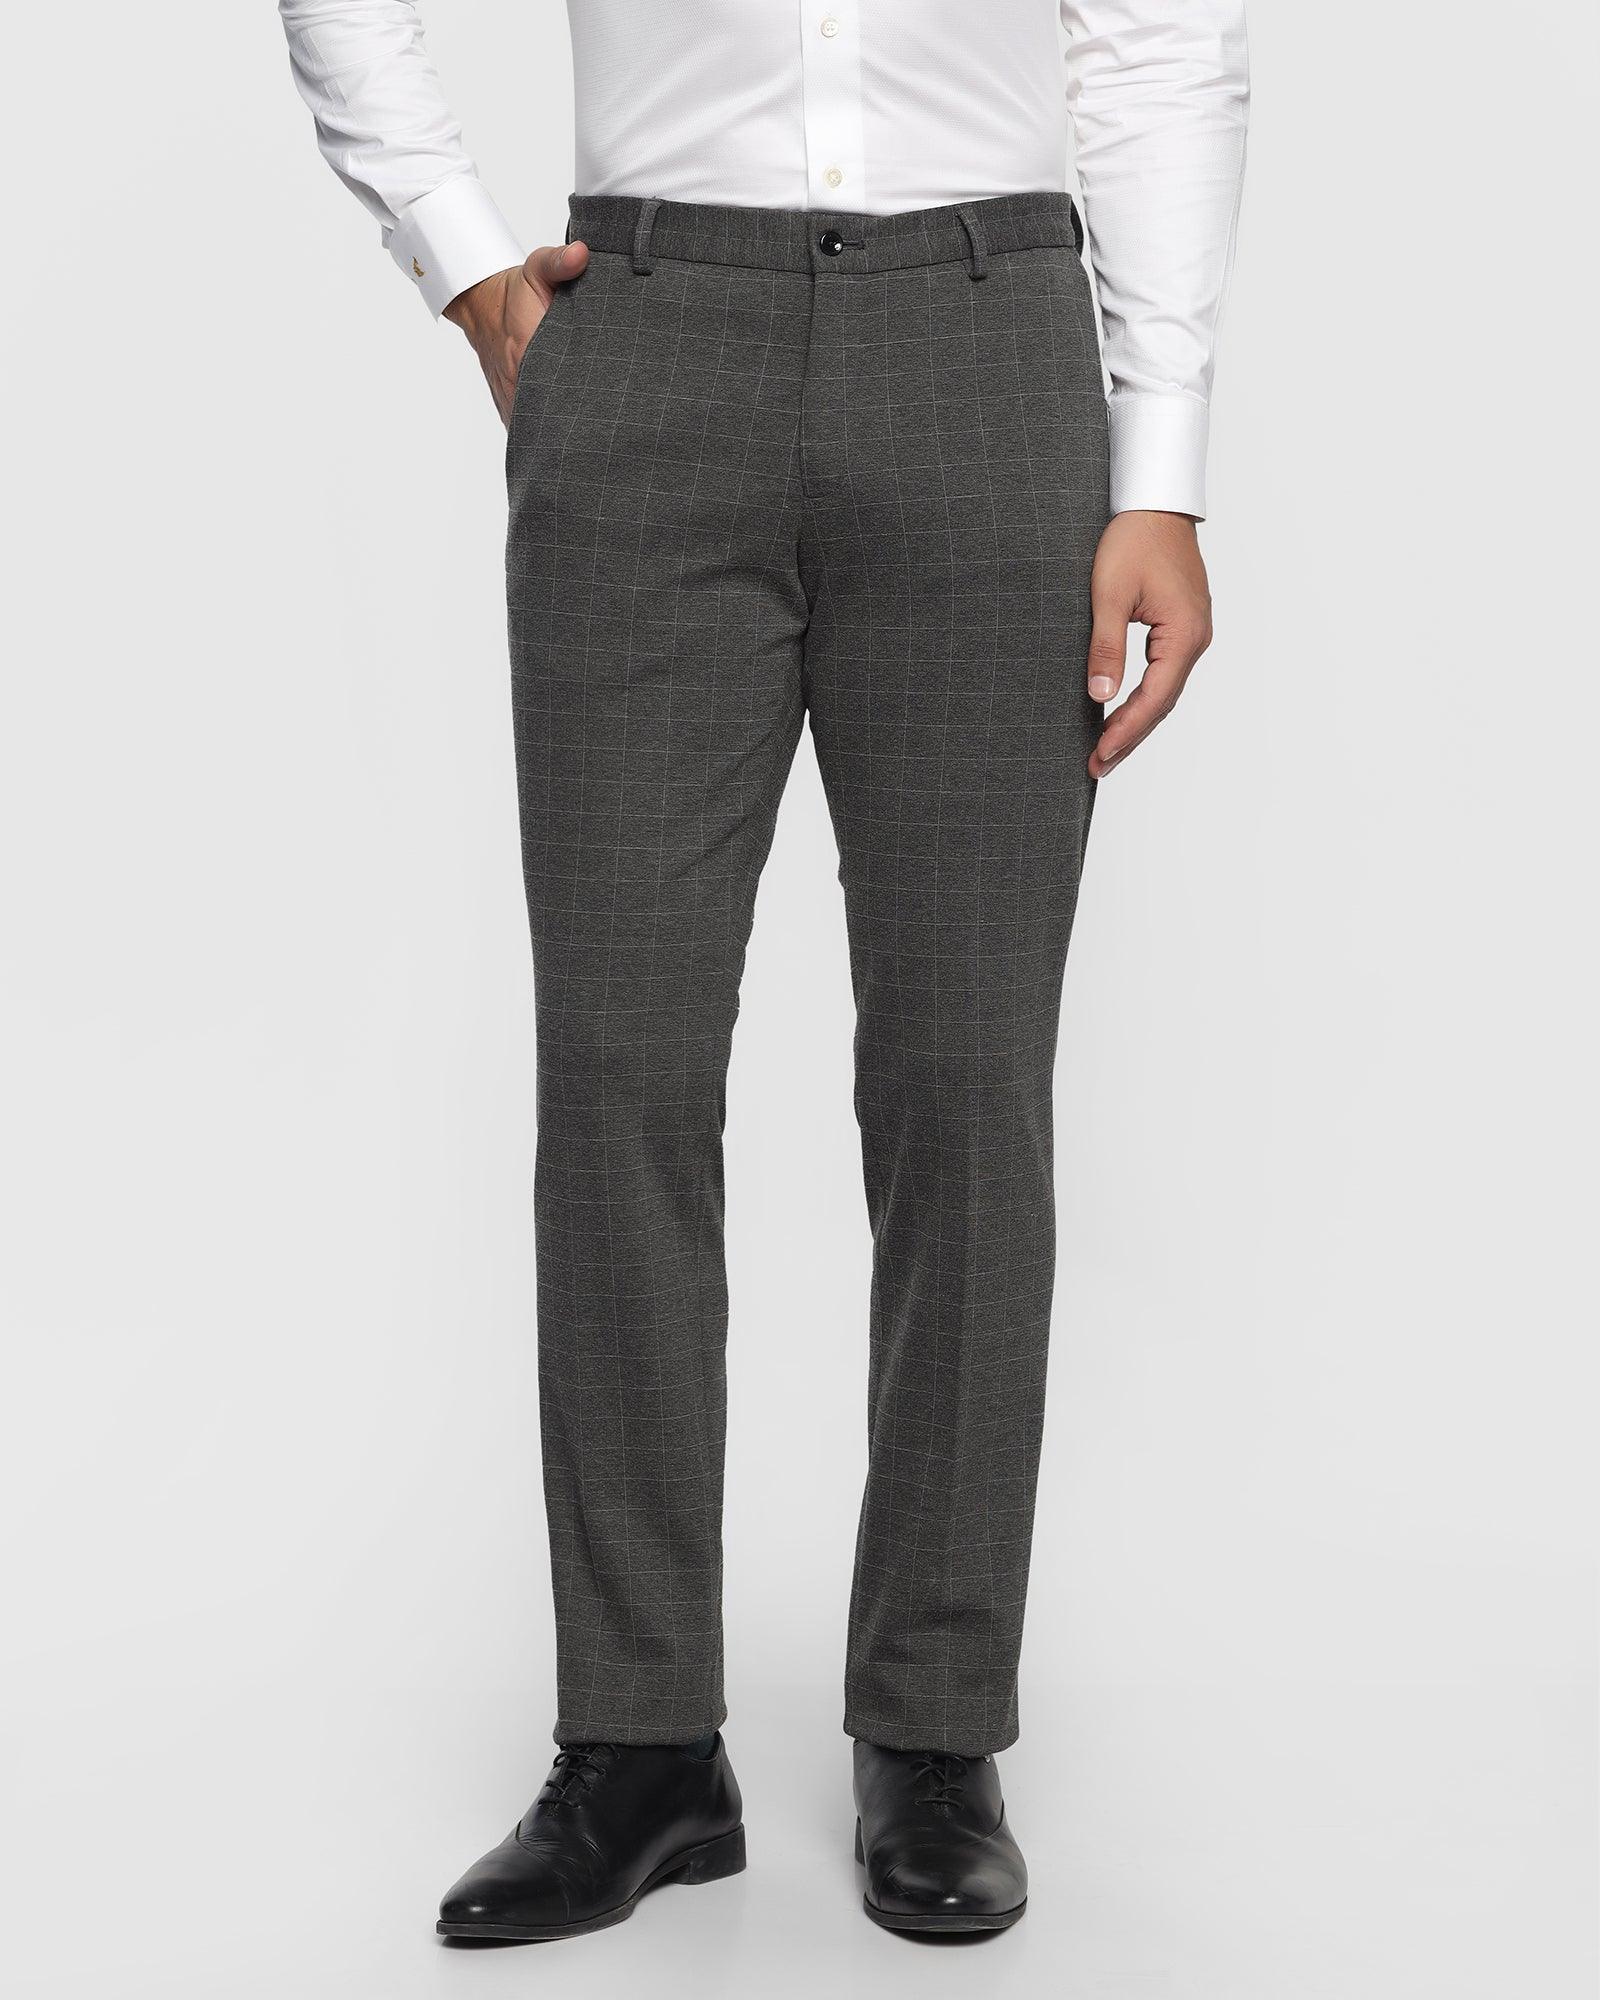 Slim Fit B-91 Formal Charcoal Check Trouser - Oslo